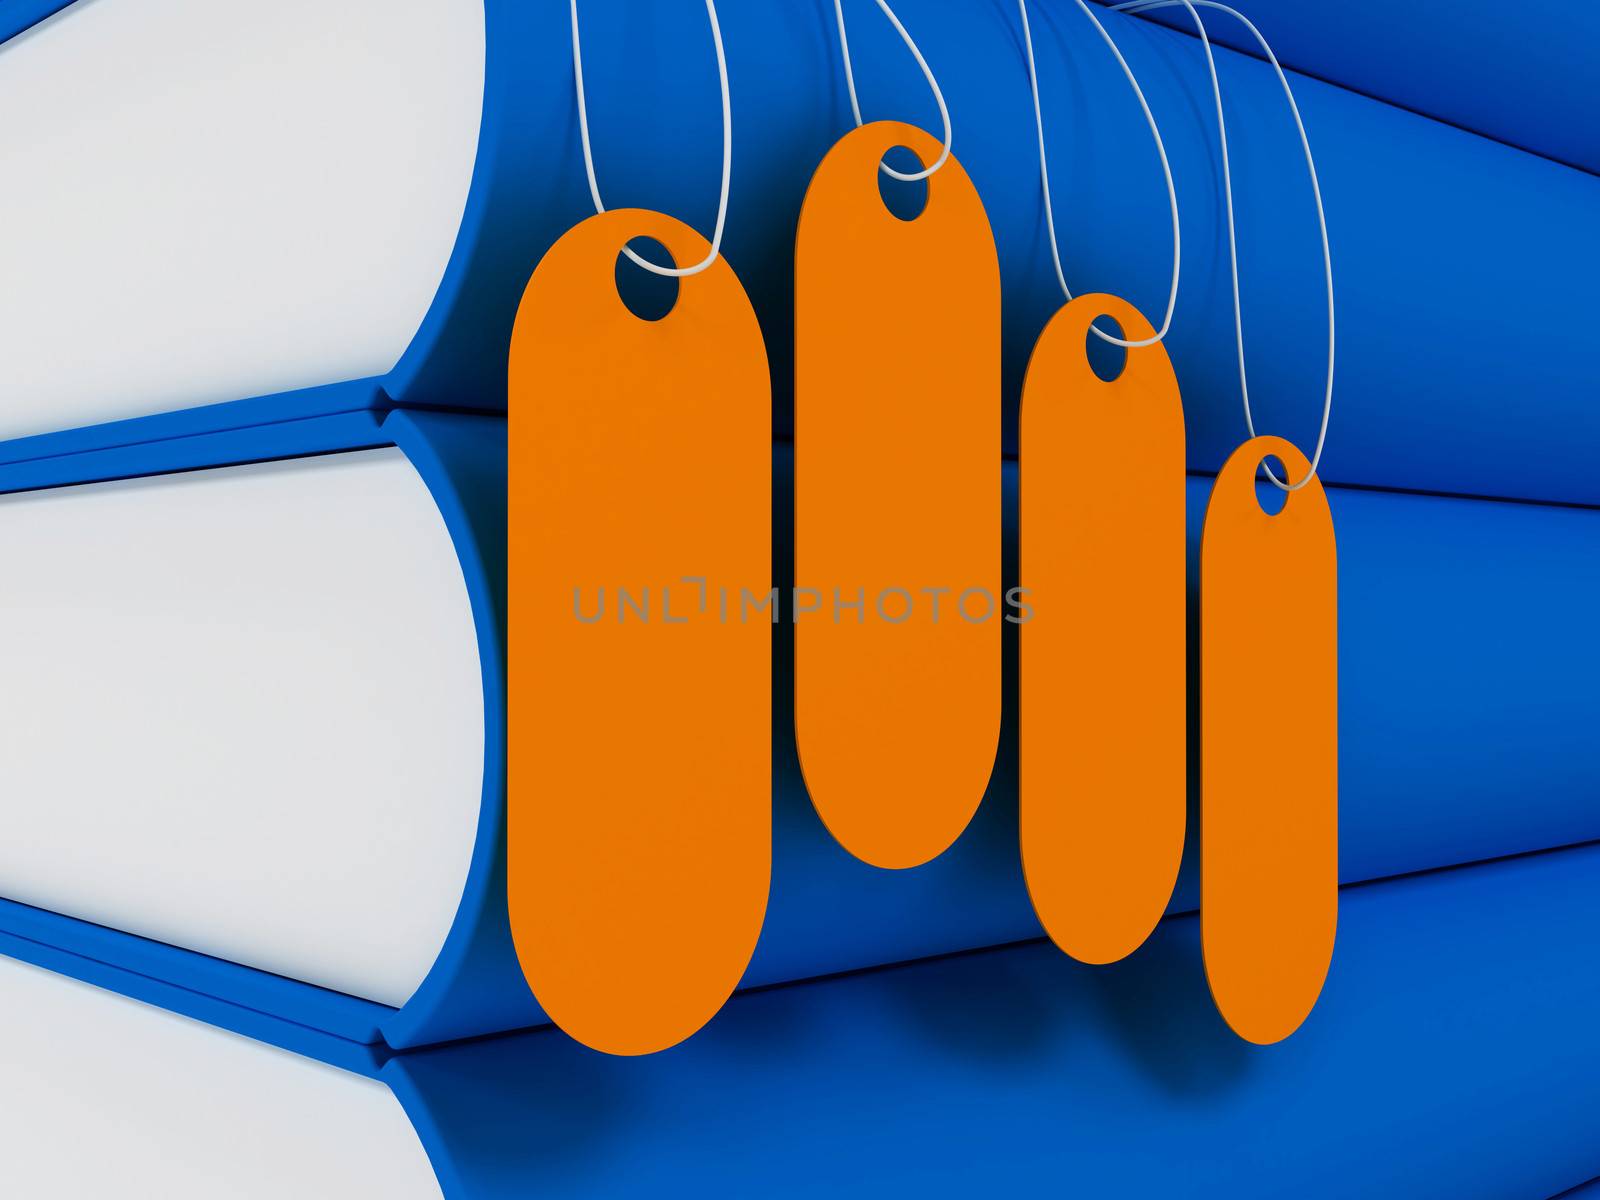 conceptually 3d blank tag hanging on blue book